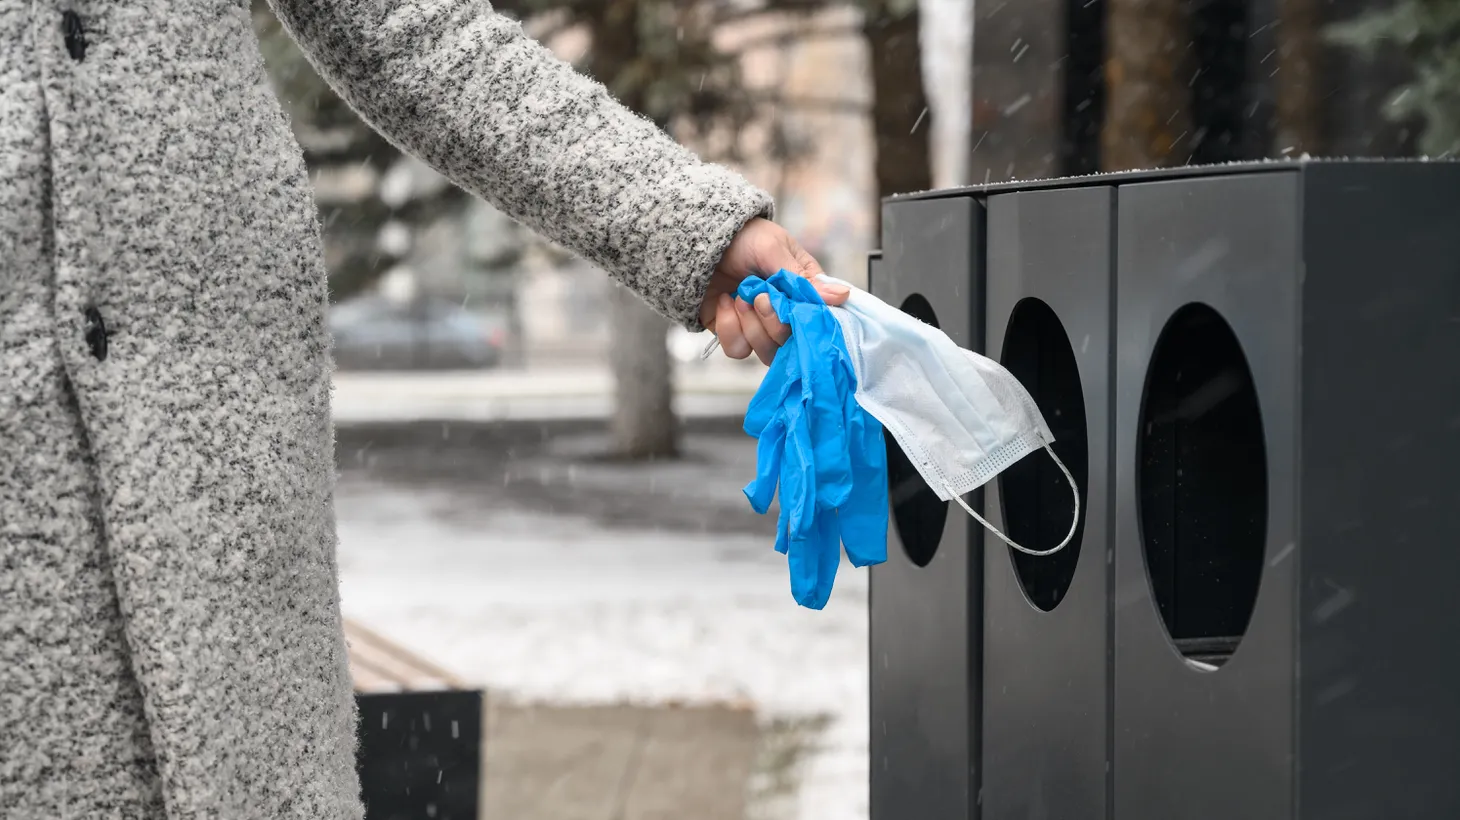 A person throws a mask and gloves into a trash bin. Highlighting racial disparities reduces fear of COVID among white people, and lowers support for masks and other safety measures, according to a new study published in ScienceDirect.